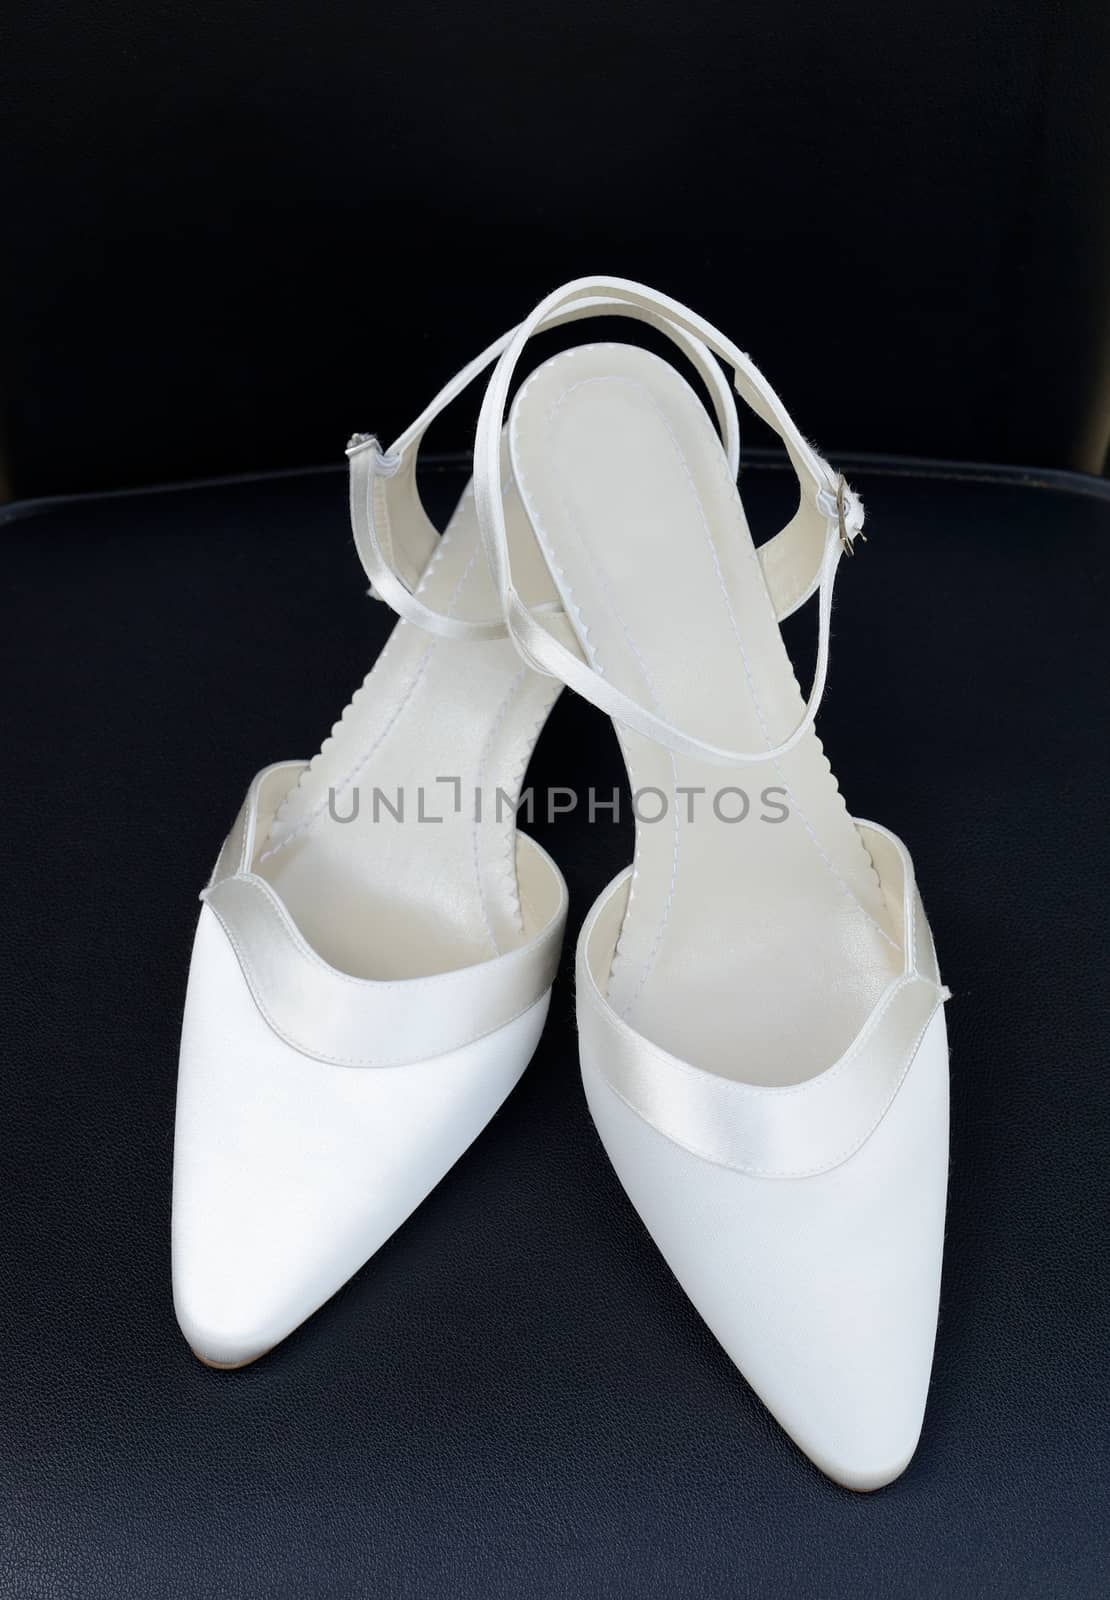 Pair of shoes for bride by kmwphotography